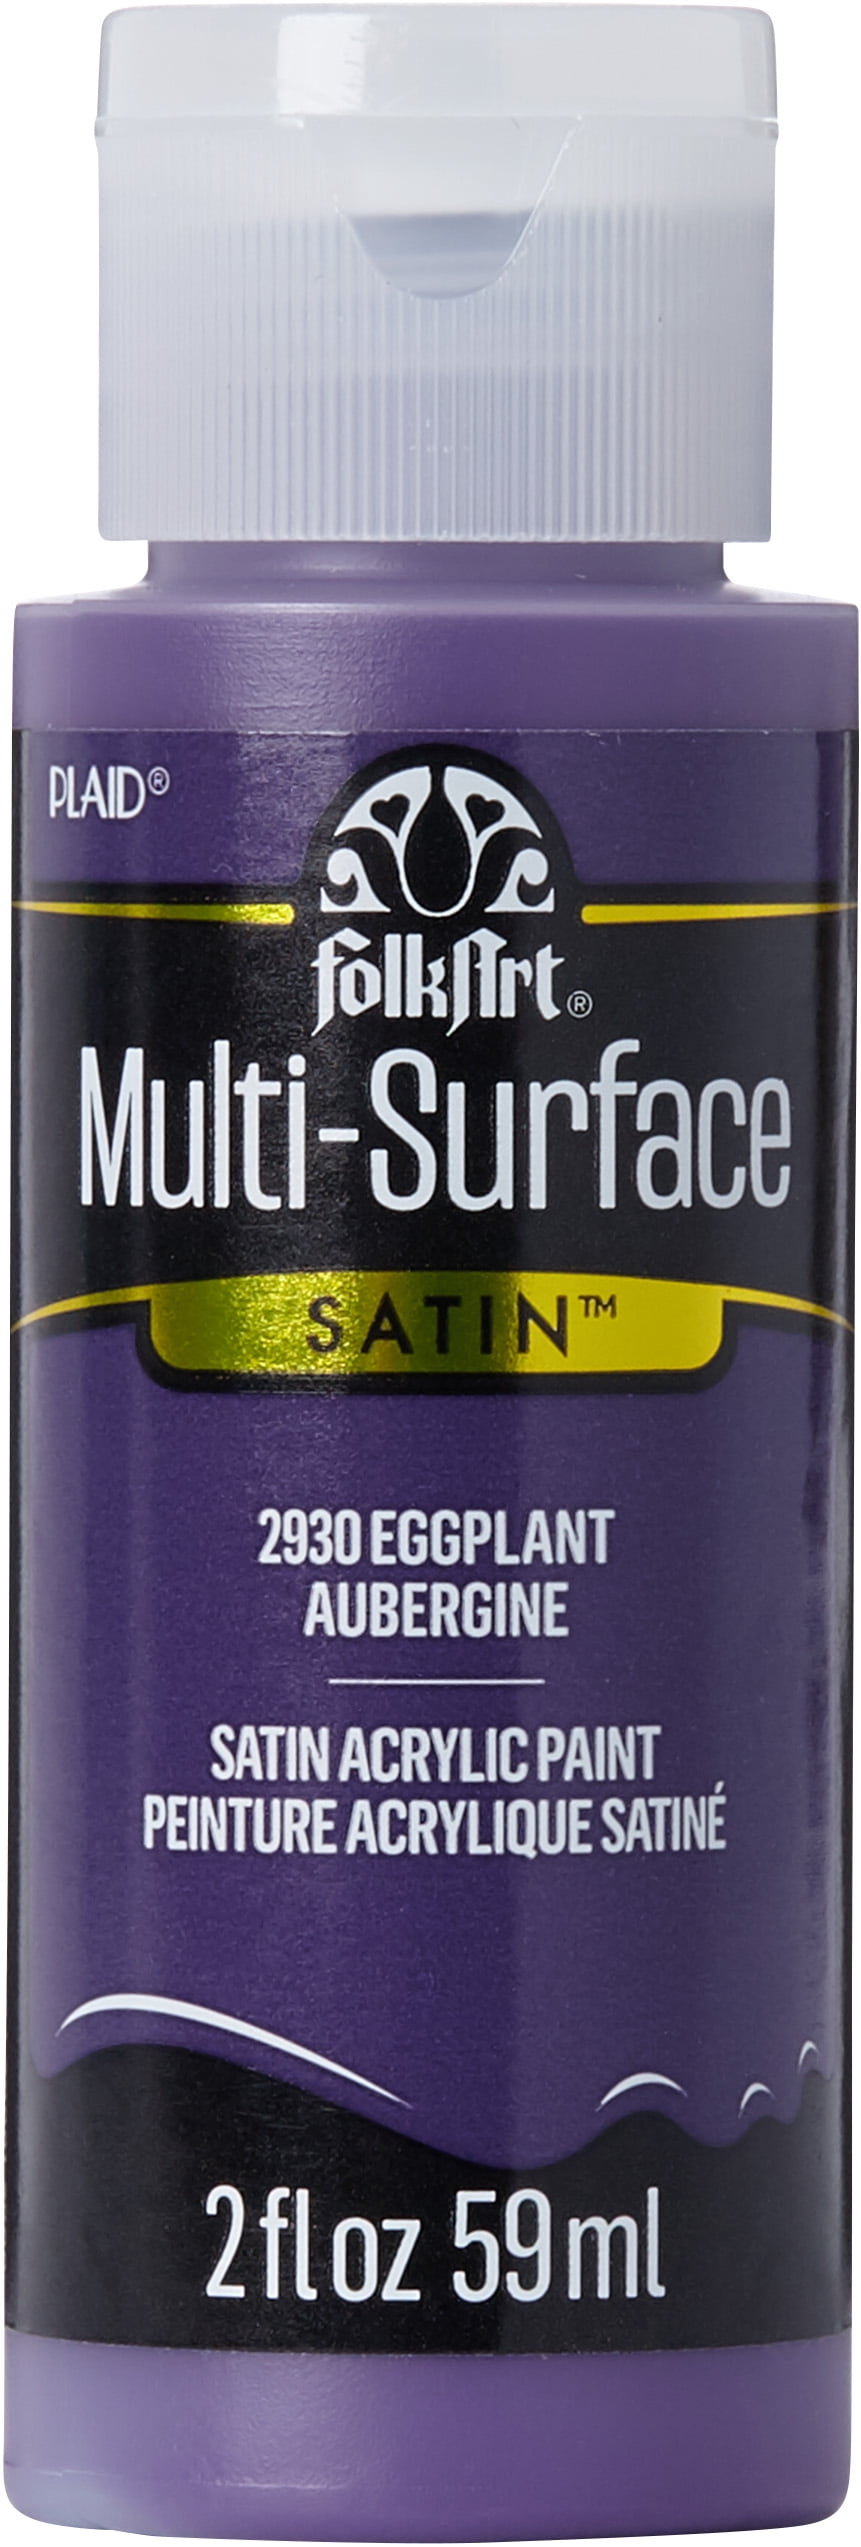  FolkArt PROMO830 Multi Satin Finish Acrylic Craft Paint Set  Designed for Beginners and Artists, Non-Toxic Formula That Works on All  Surfaces, 2 oz, 2 Fl Oz (Pack of 12), 12 Colors